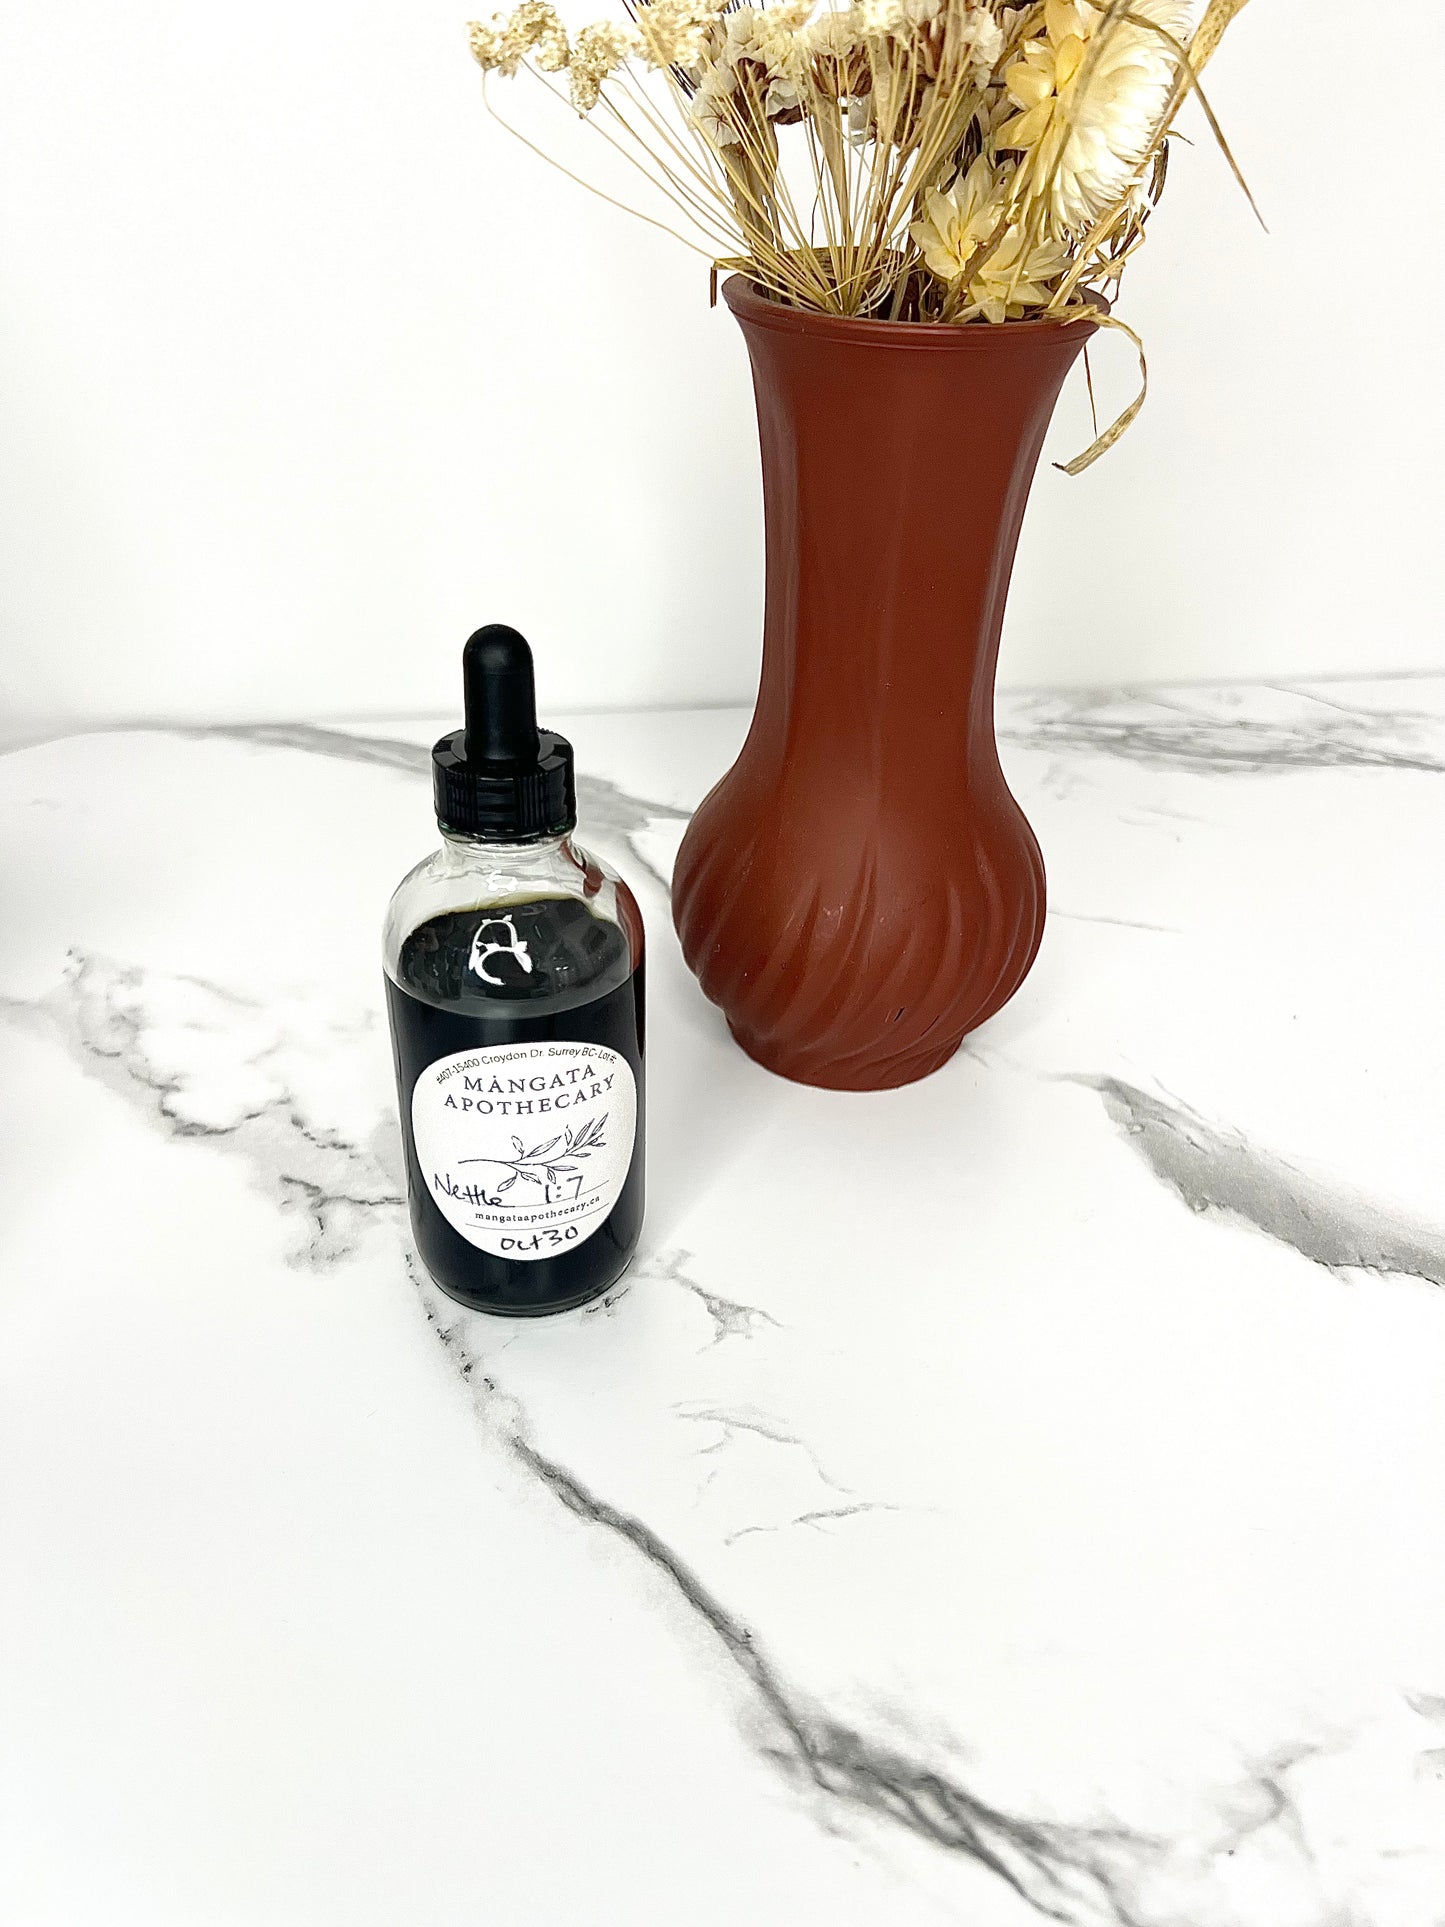 Nettle Tincture - Product Image For Mangata Dispensary